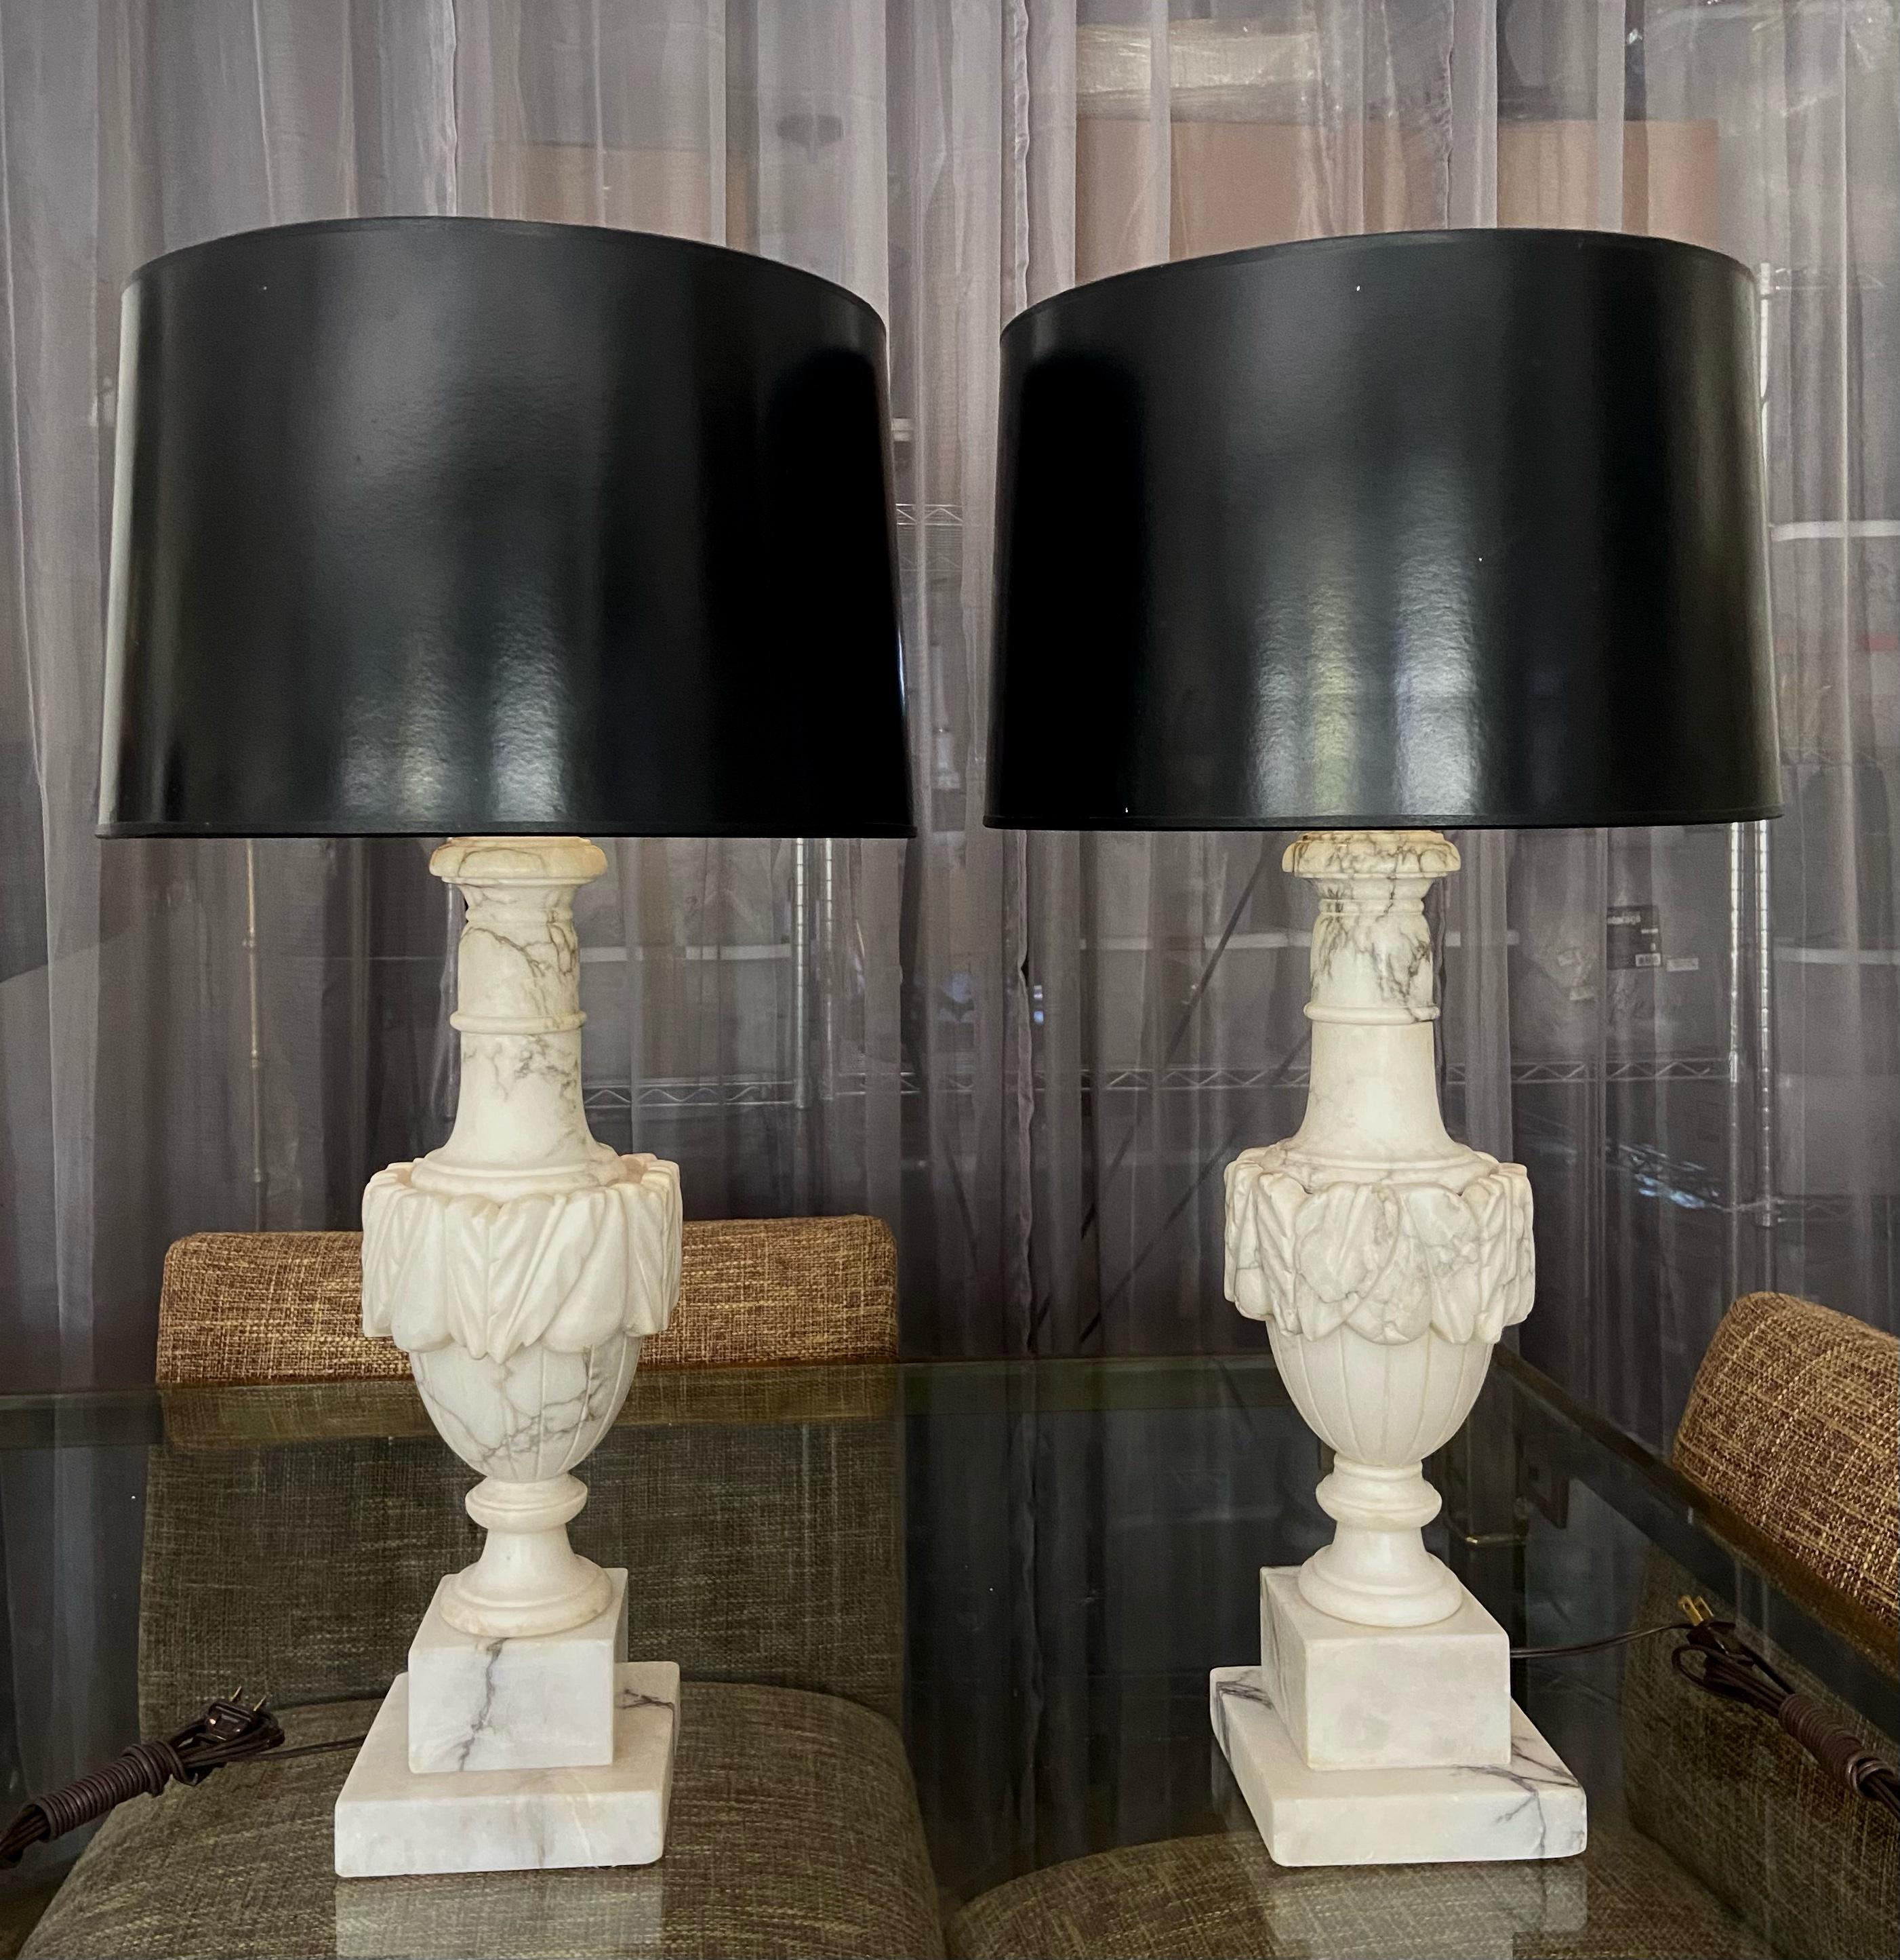 Pair of finely crafted hand carved neo-classic style urn form alabaster lamps. Newly wired with new brass 3 way sockets and cords. Shades are not included.
Height to top of alabaster is 18.5